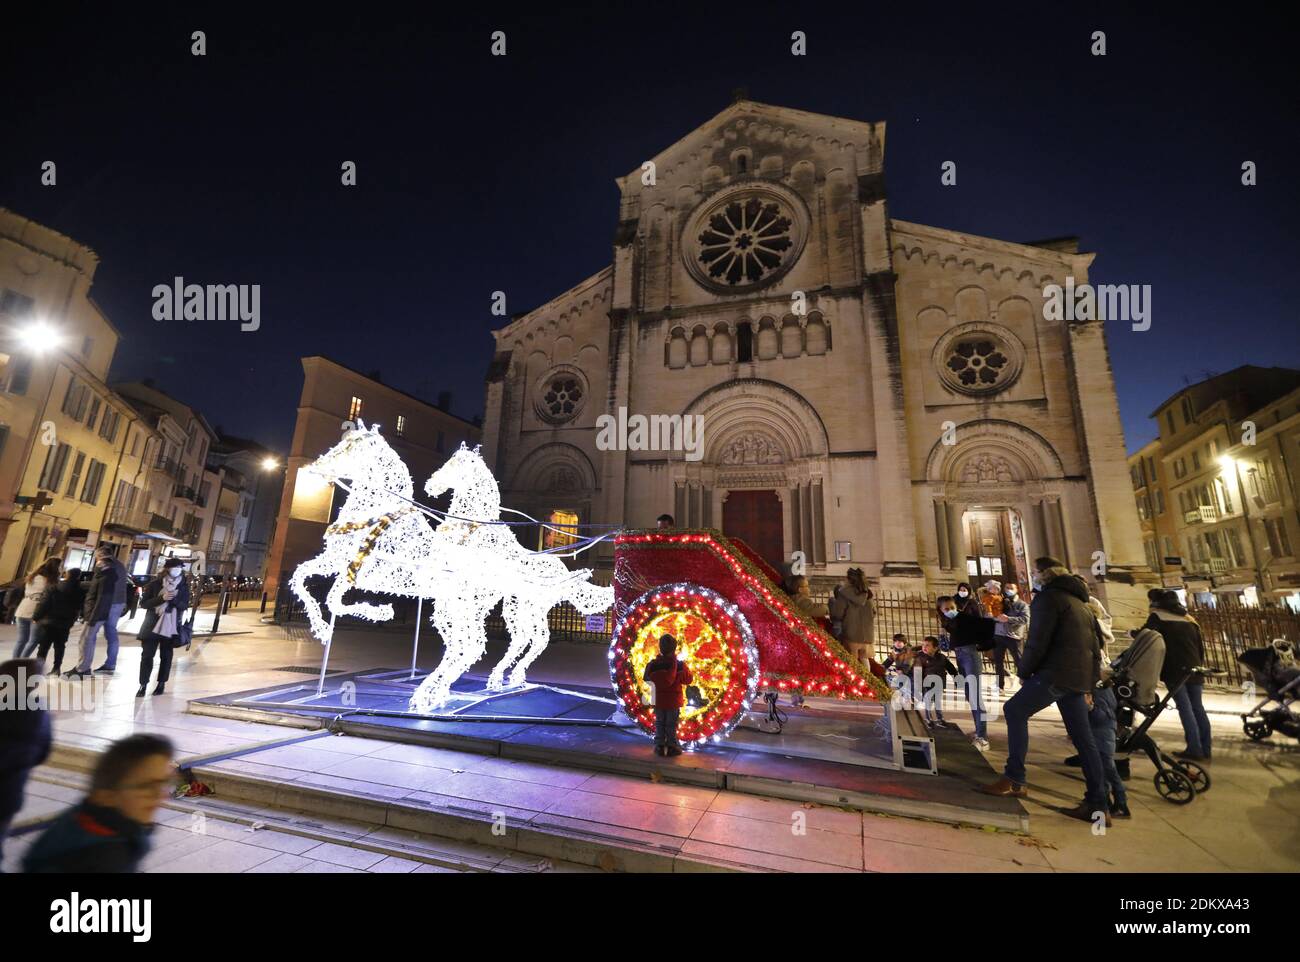 The magic of Christmas takes back its rights in these difficult times. On  Friday evening, the city of Nîmes officially gave the starting signal for  the end of the year celebrations, from